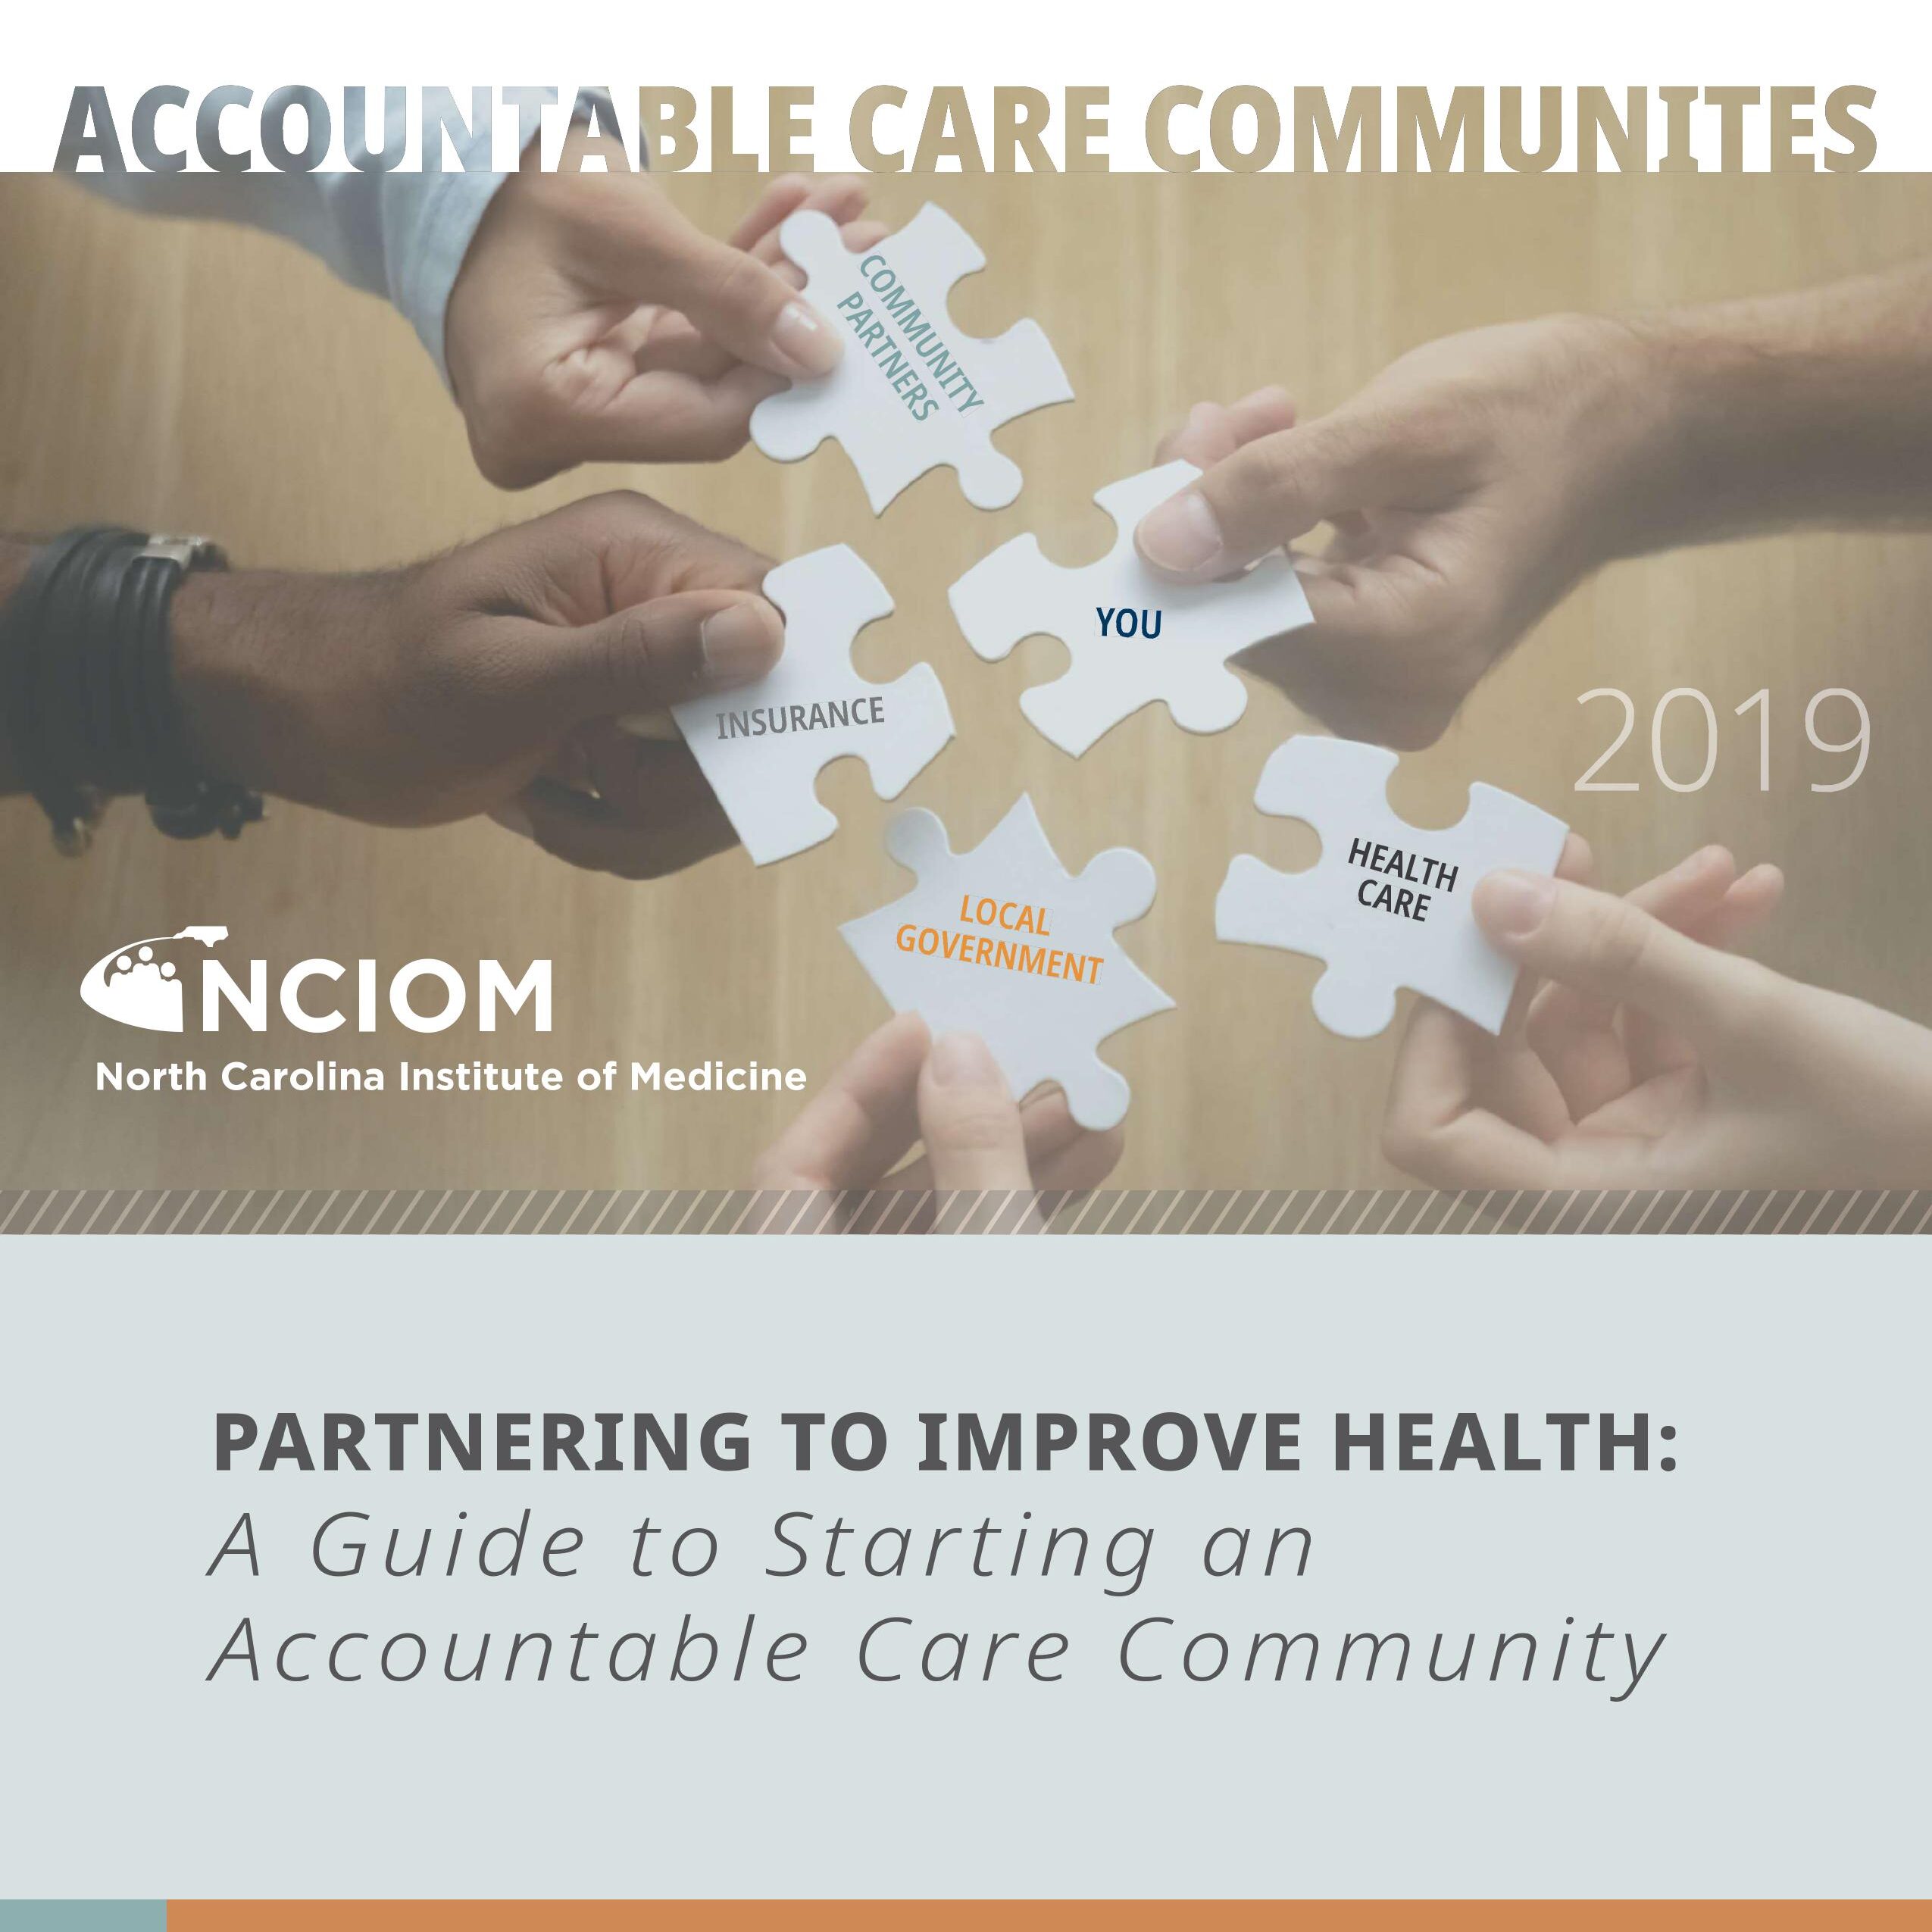 cover of accountable care community guide - partnering to improve health. five hands, each holding a white puzzle piece coming together.